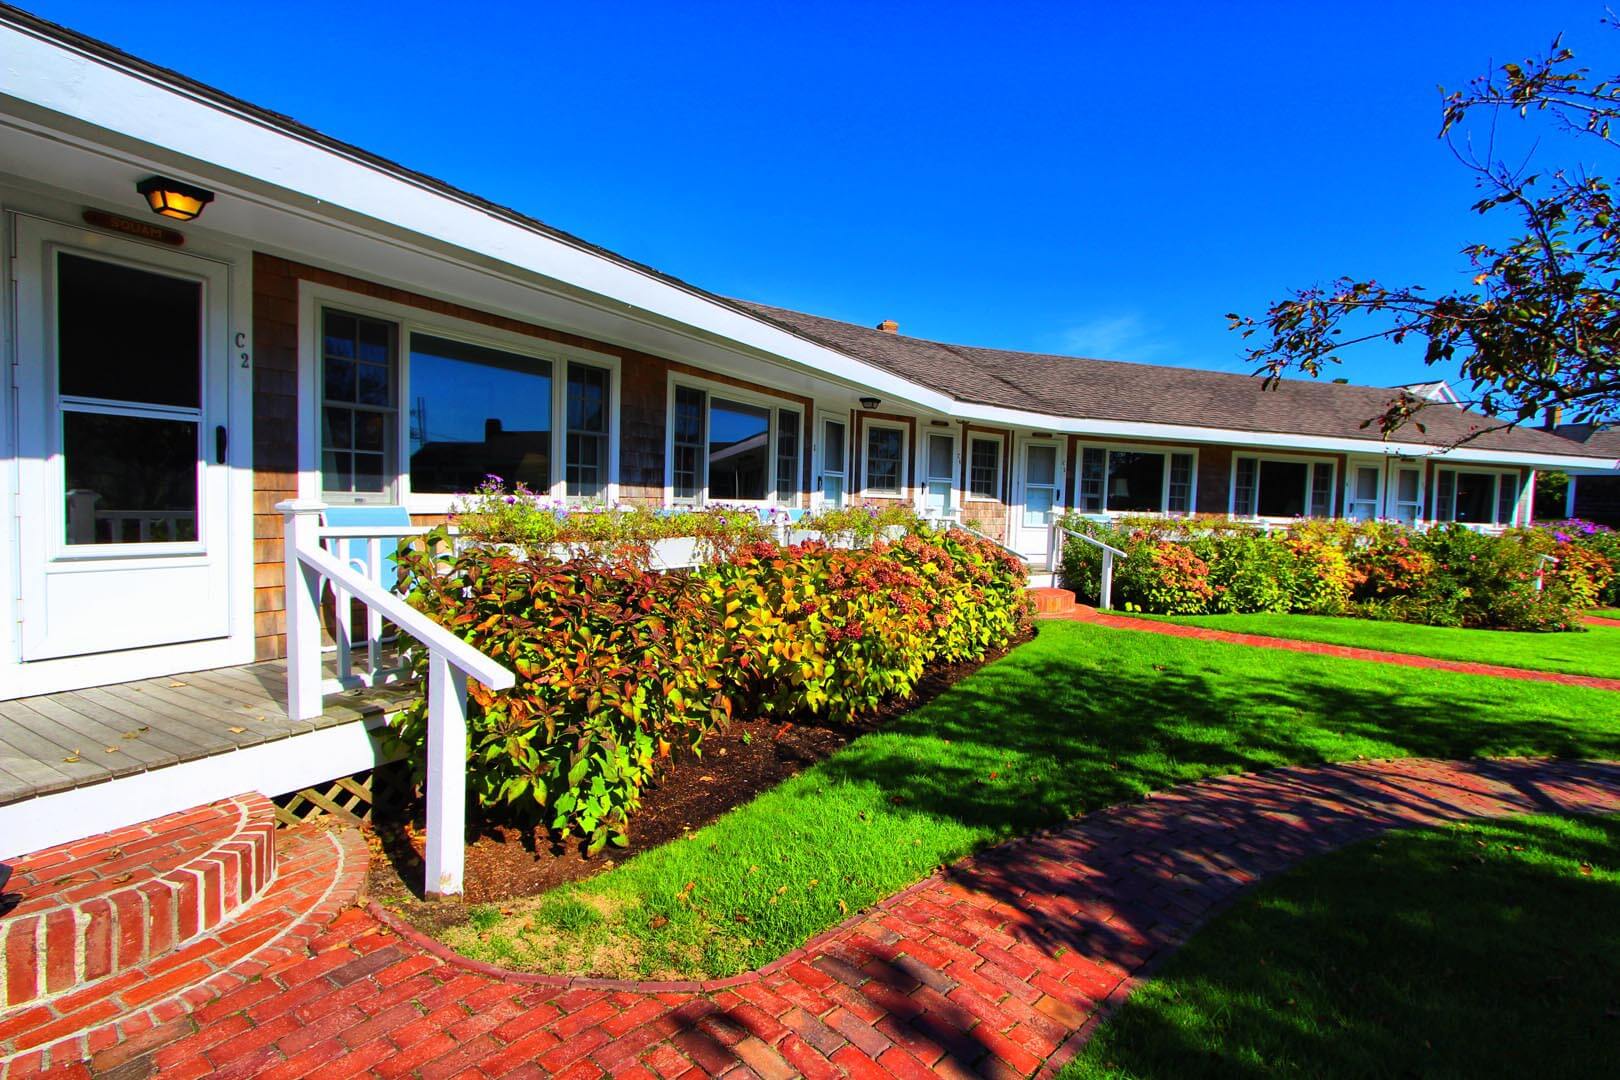 A beautiful unit entrance at the Brant Point Courtyard in Massachusetts.